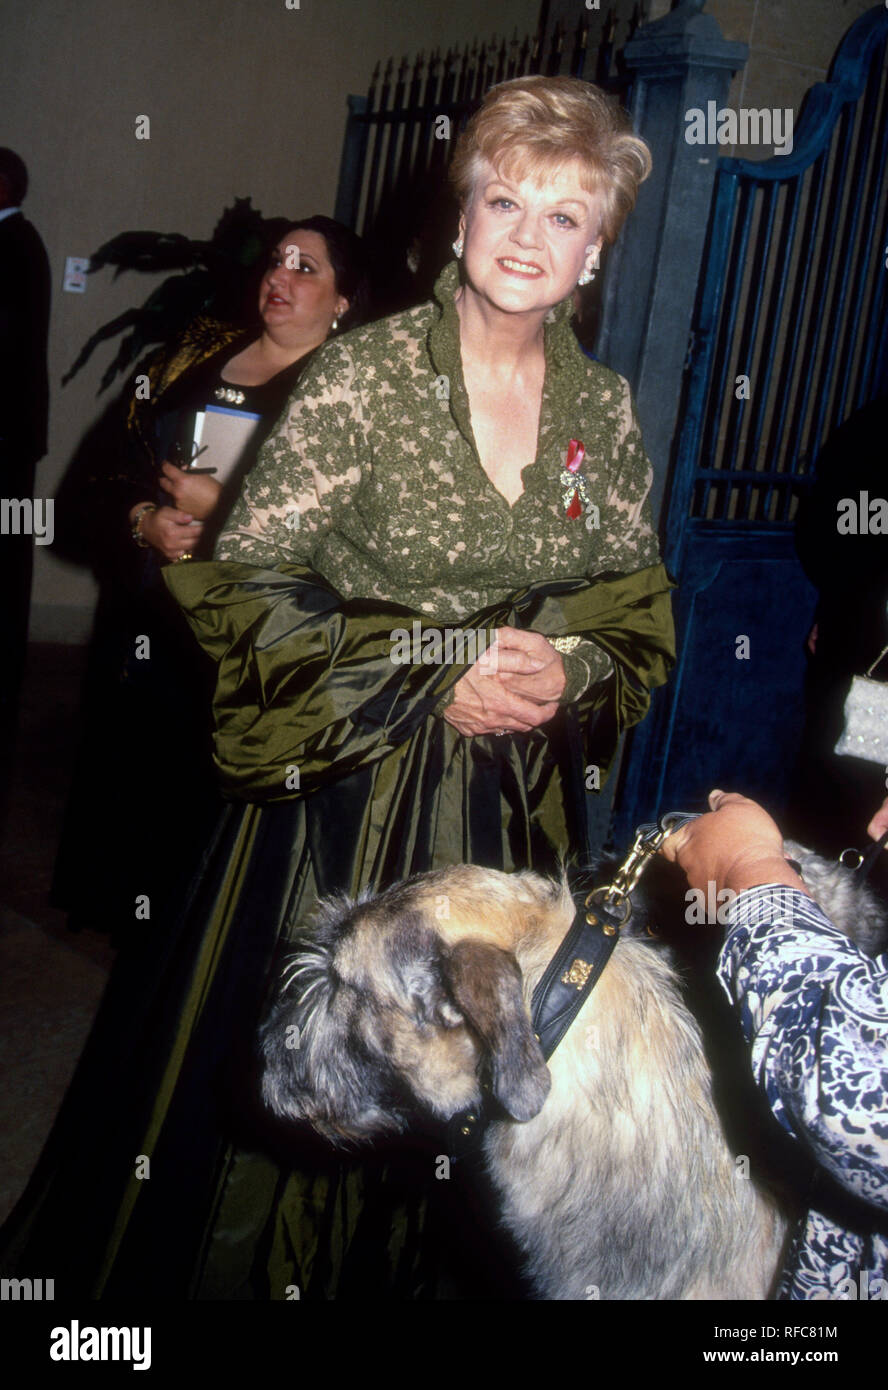 BEVERLY HILLS, CA - NOVEMBER 4: Actress Angela Lansbury attends American Ireland Fund Awards Gala Honoring Angela Lansbury on November 4, 1993 at the Beverly Hilton Hotel in Beverly Hills, California. Photo by Barry King/Alamy Stock Photo Stock Photo